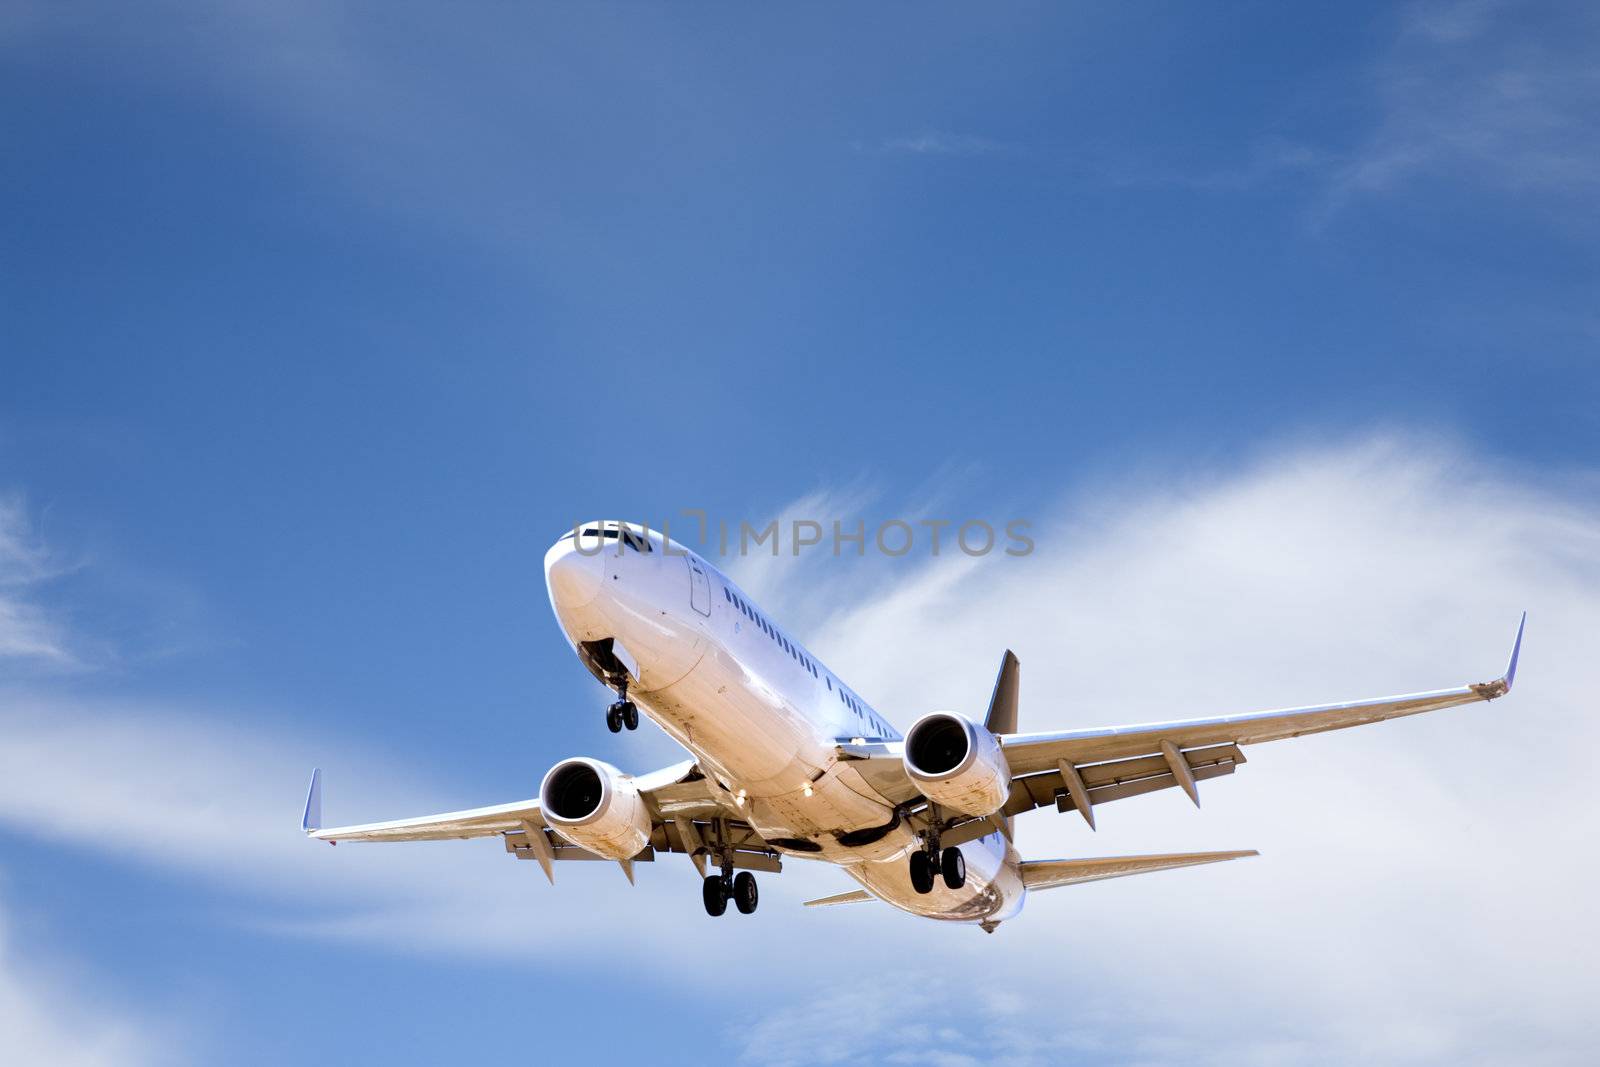 Commercial Aircraft in Summer Sky by Travelling-light